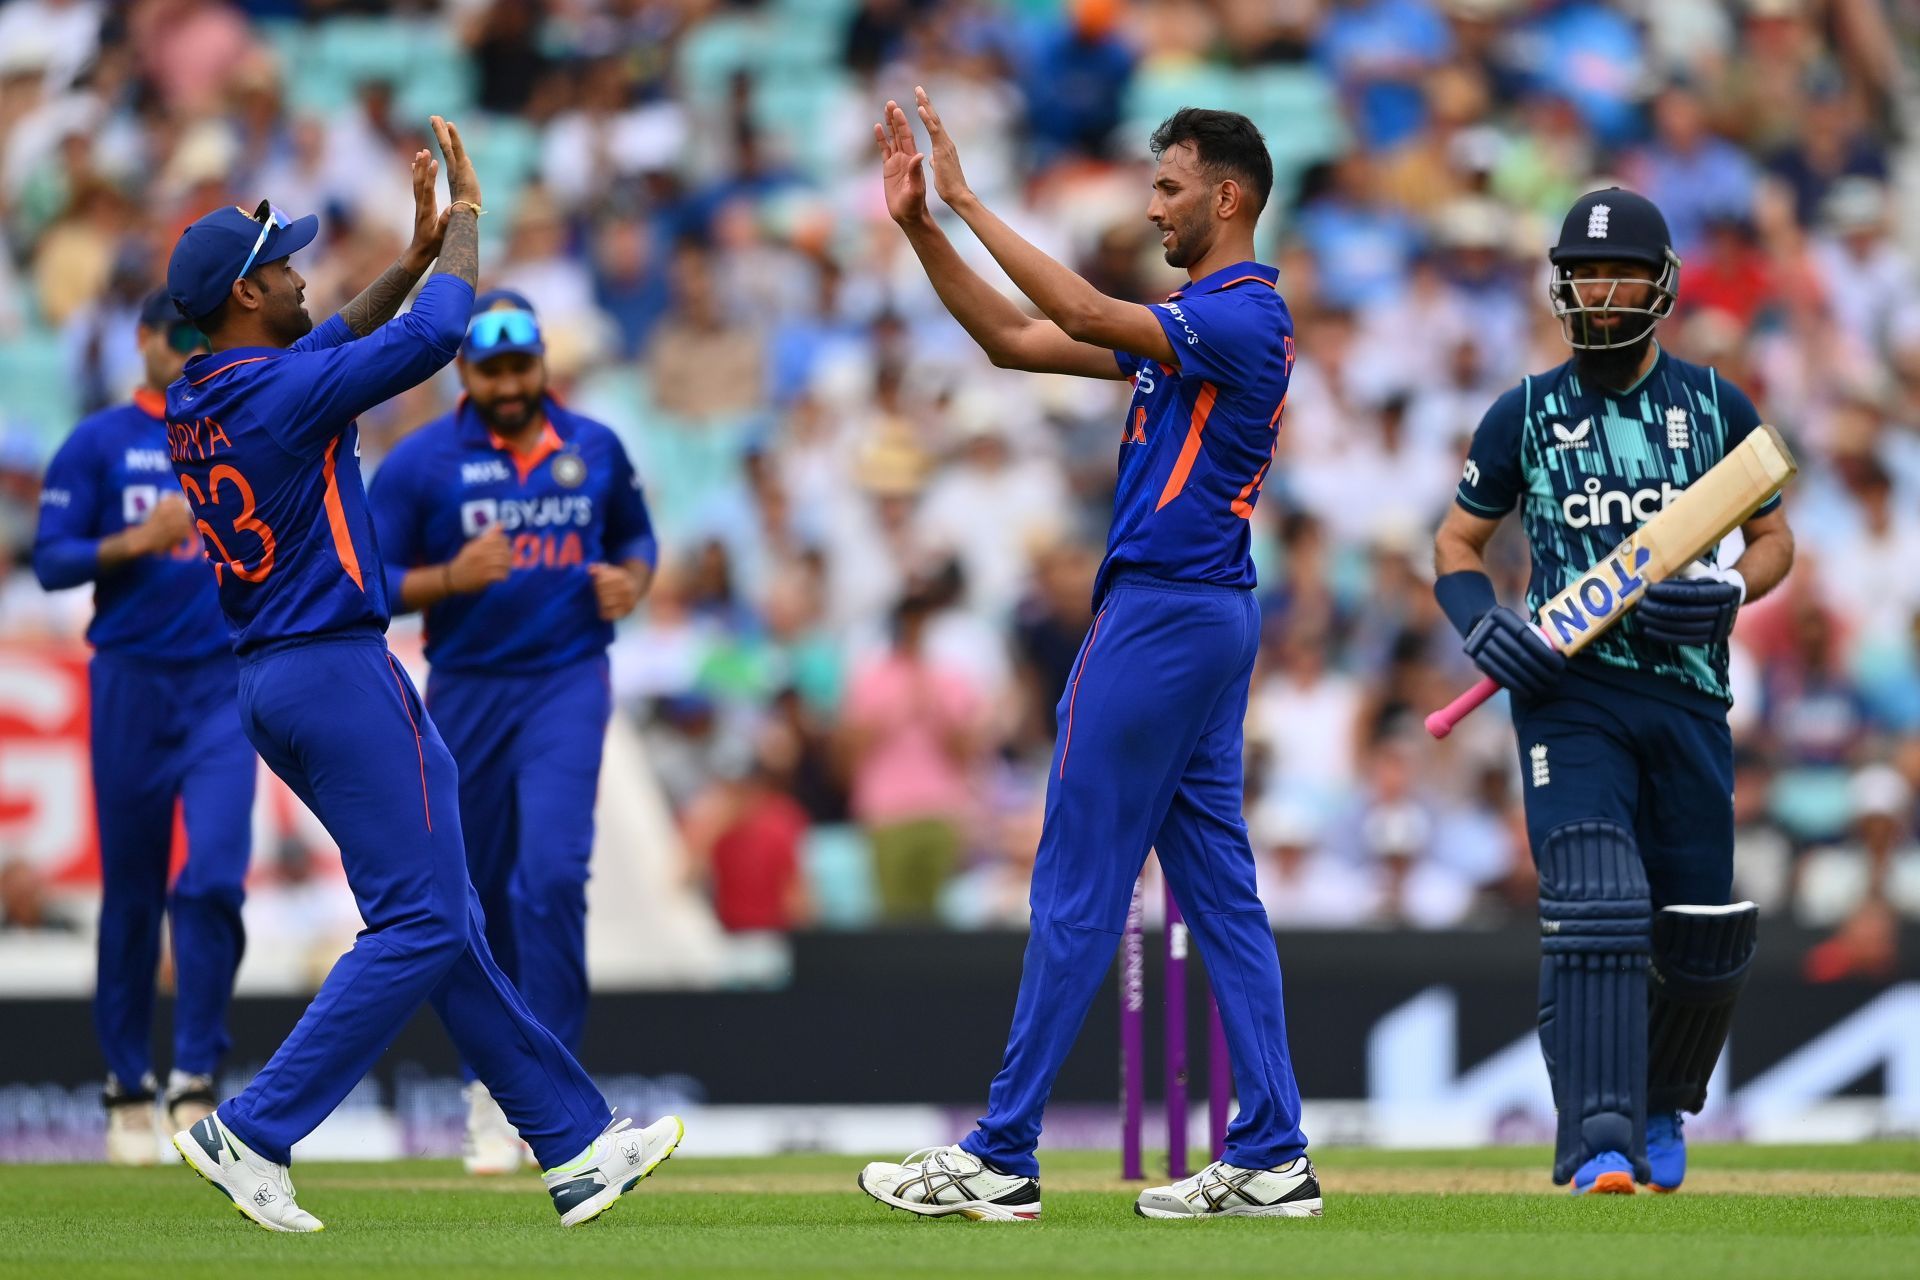 Prasidh Krishna did not have a great time in the ODI series against England